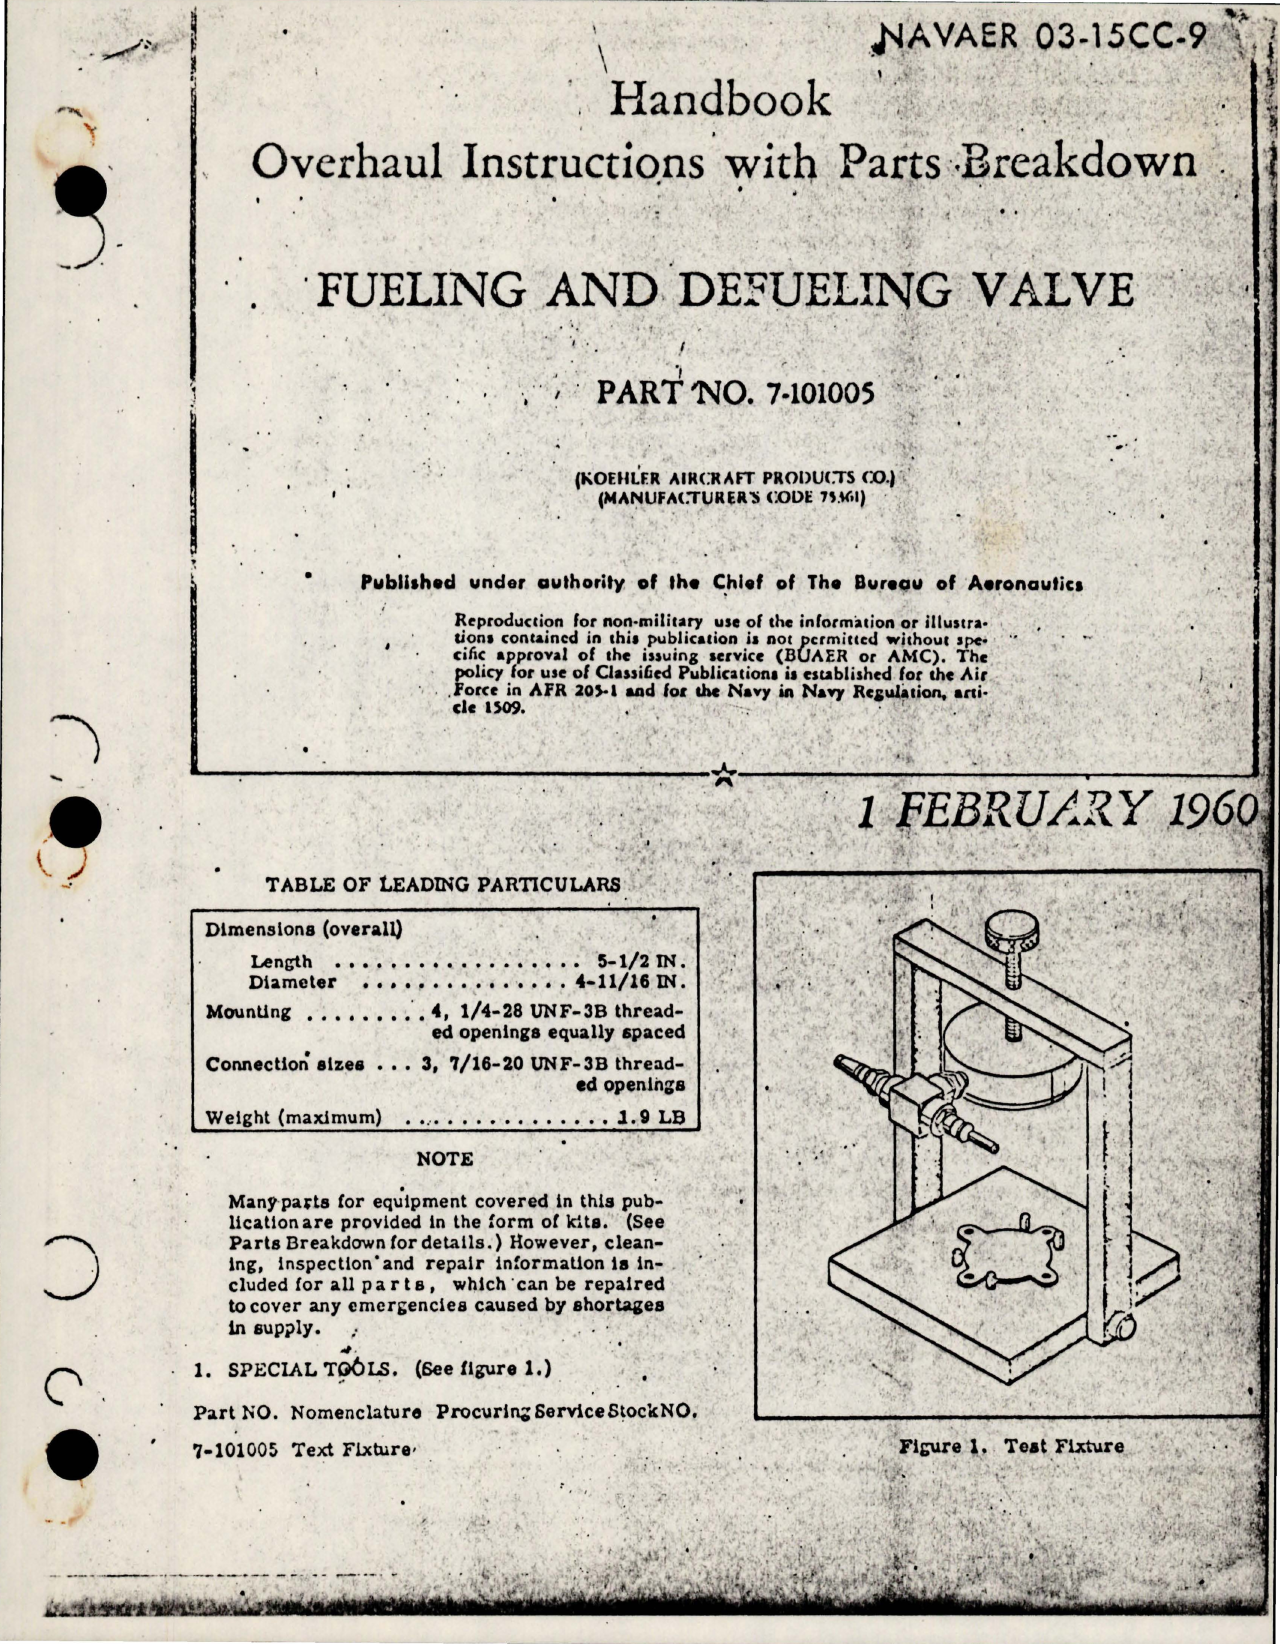 Sample page 1 from AirCorps Library document: Overhaul Instructions with Parts for Fueling and Defueling Valve - Part 7-101005 